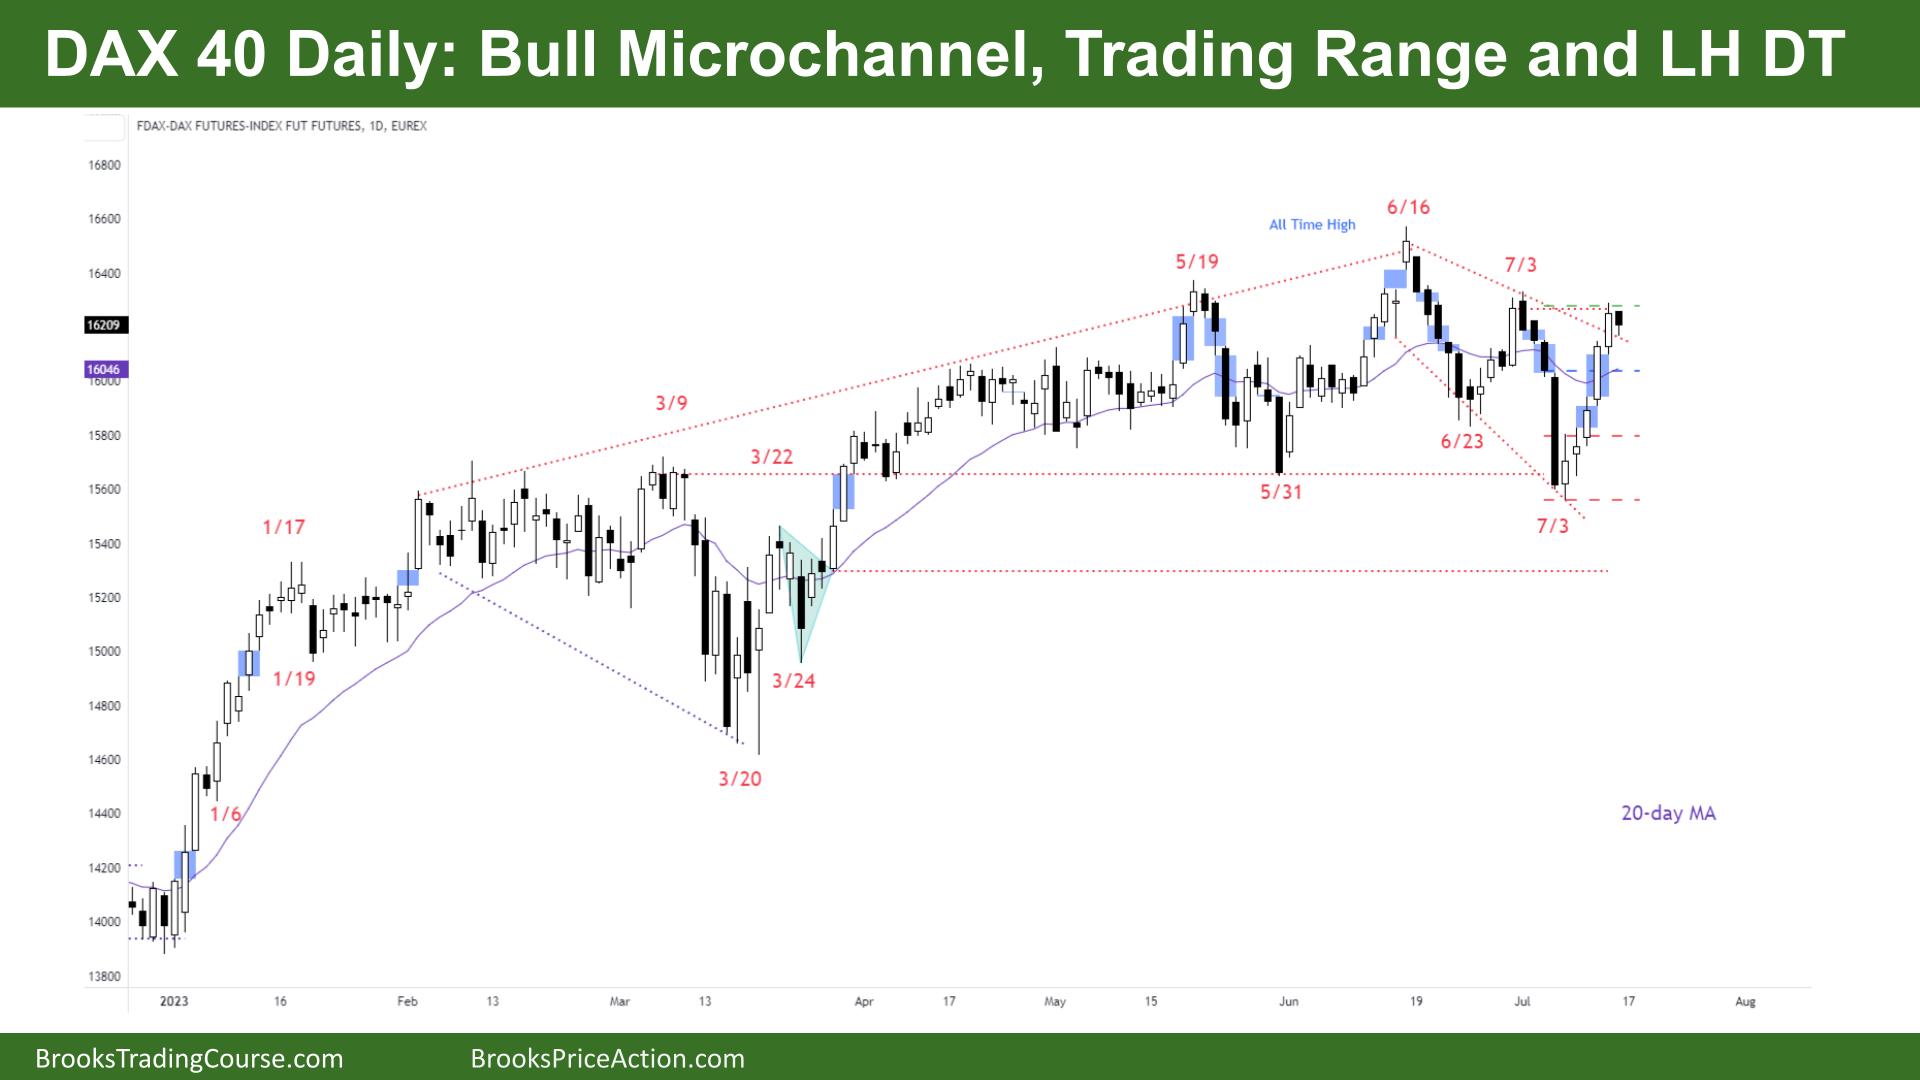 DAX 40 Bull Microchannel, Trading Range and LH DT